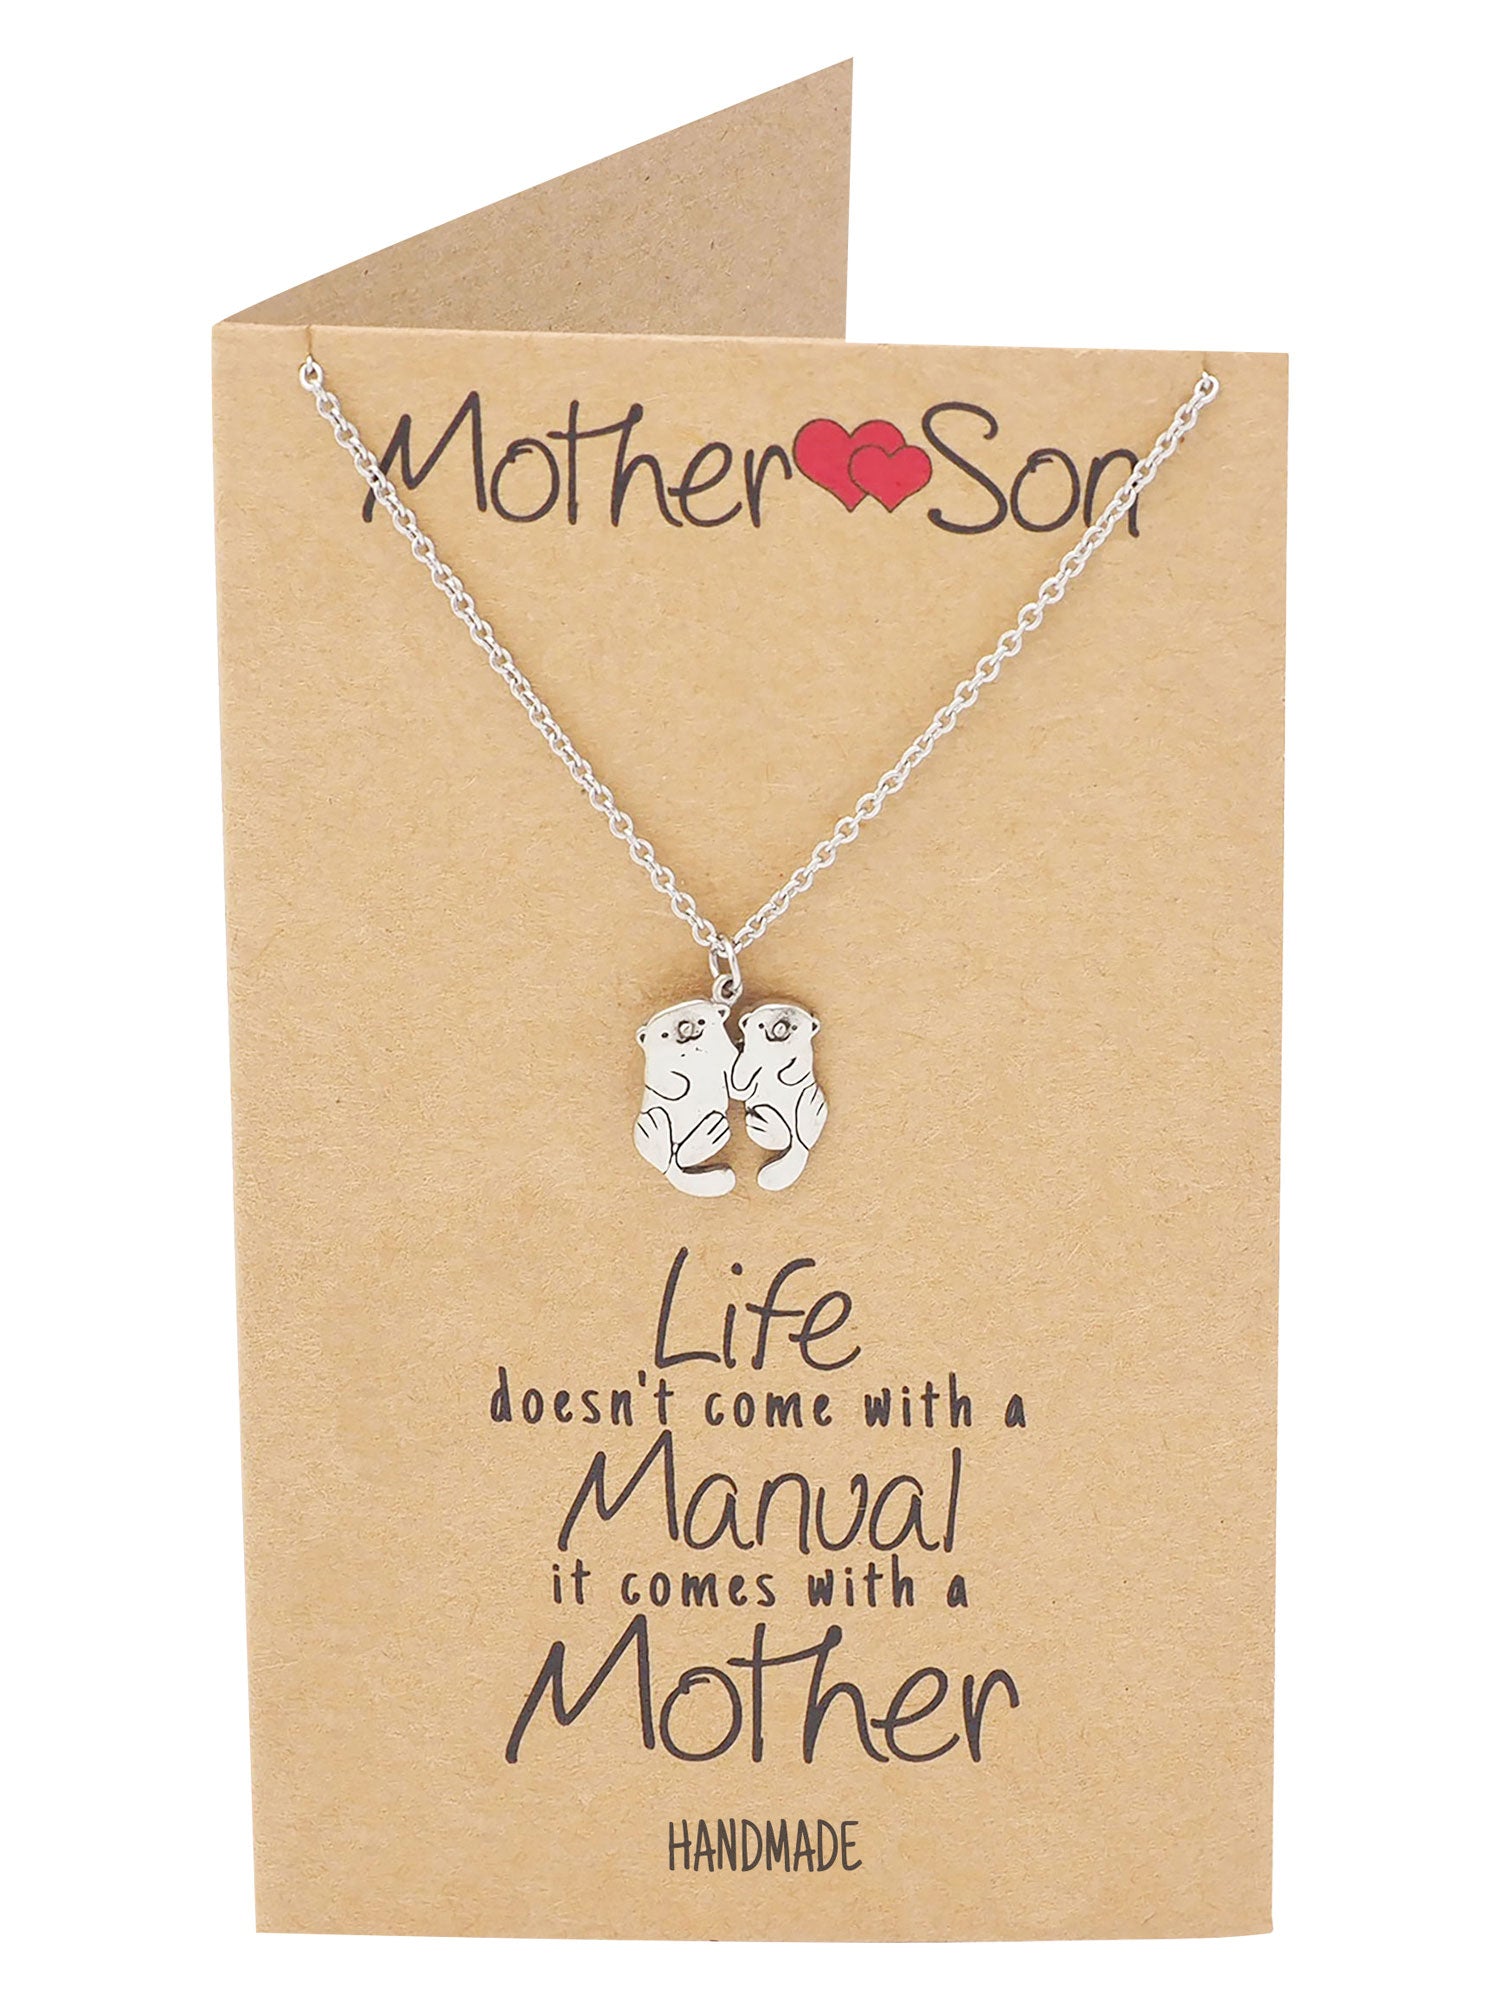 Mother Son Necklace, Mum Gift, Mom Gift, Mother Son Gift, Mother & Kid  Pendant Gold Necklace, Unique Mothers Day Gift, New Mom Jewelry - Etsy |  Gifts for mom, Mom jewelry, Mother